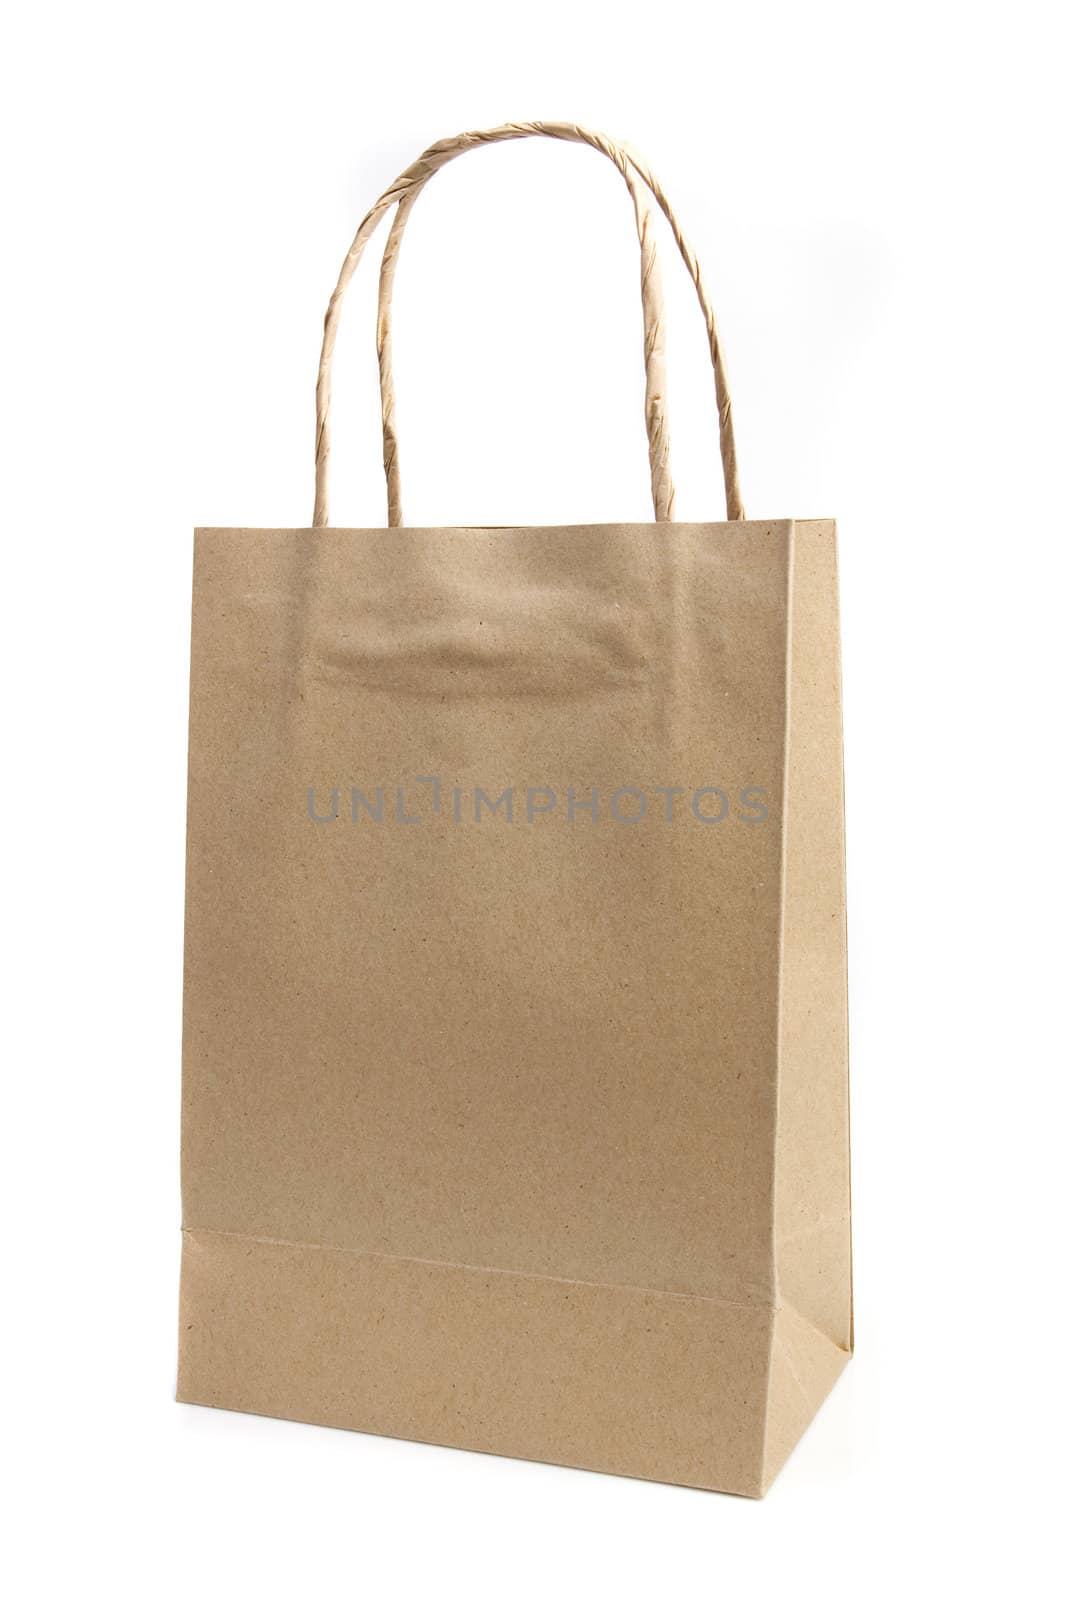 Recycle brown paper bag on white isolated